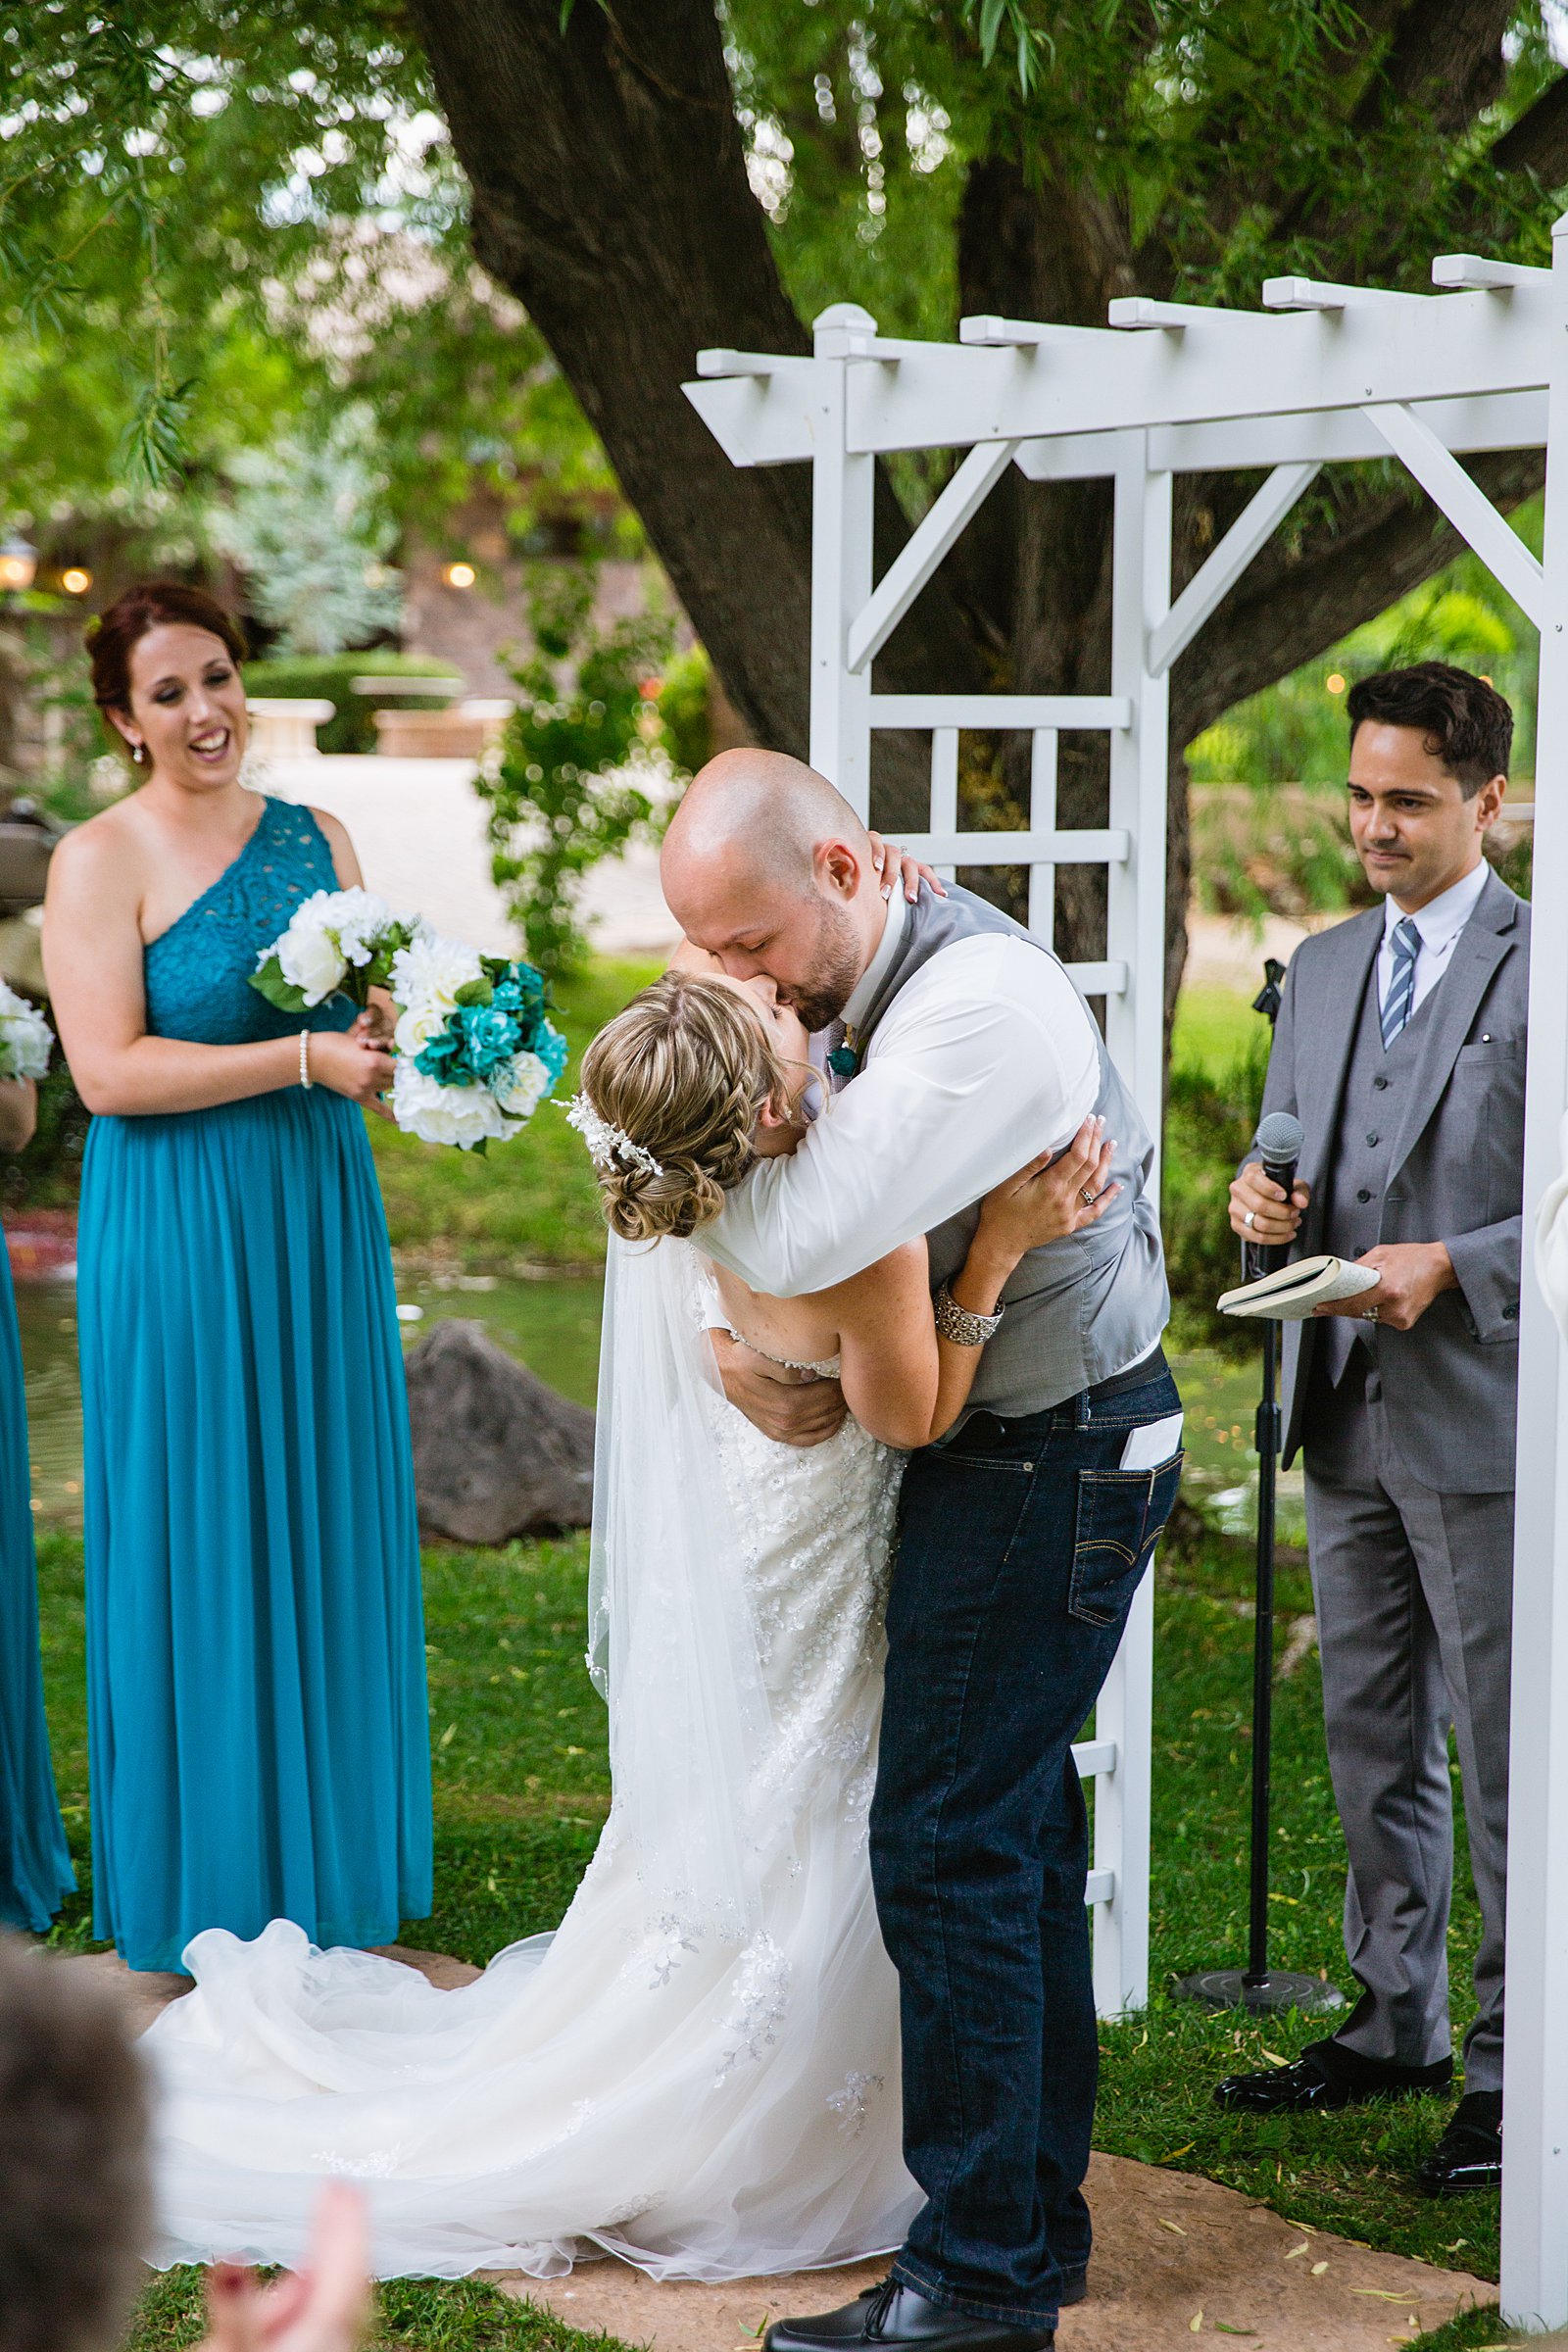 Bride and Groom share their first kiss during their wedding ceremony at The Windmill House by Arizona wedding photographer PMA Photography.